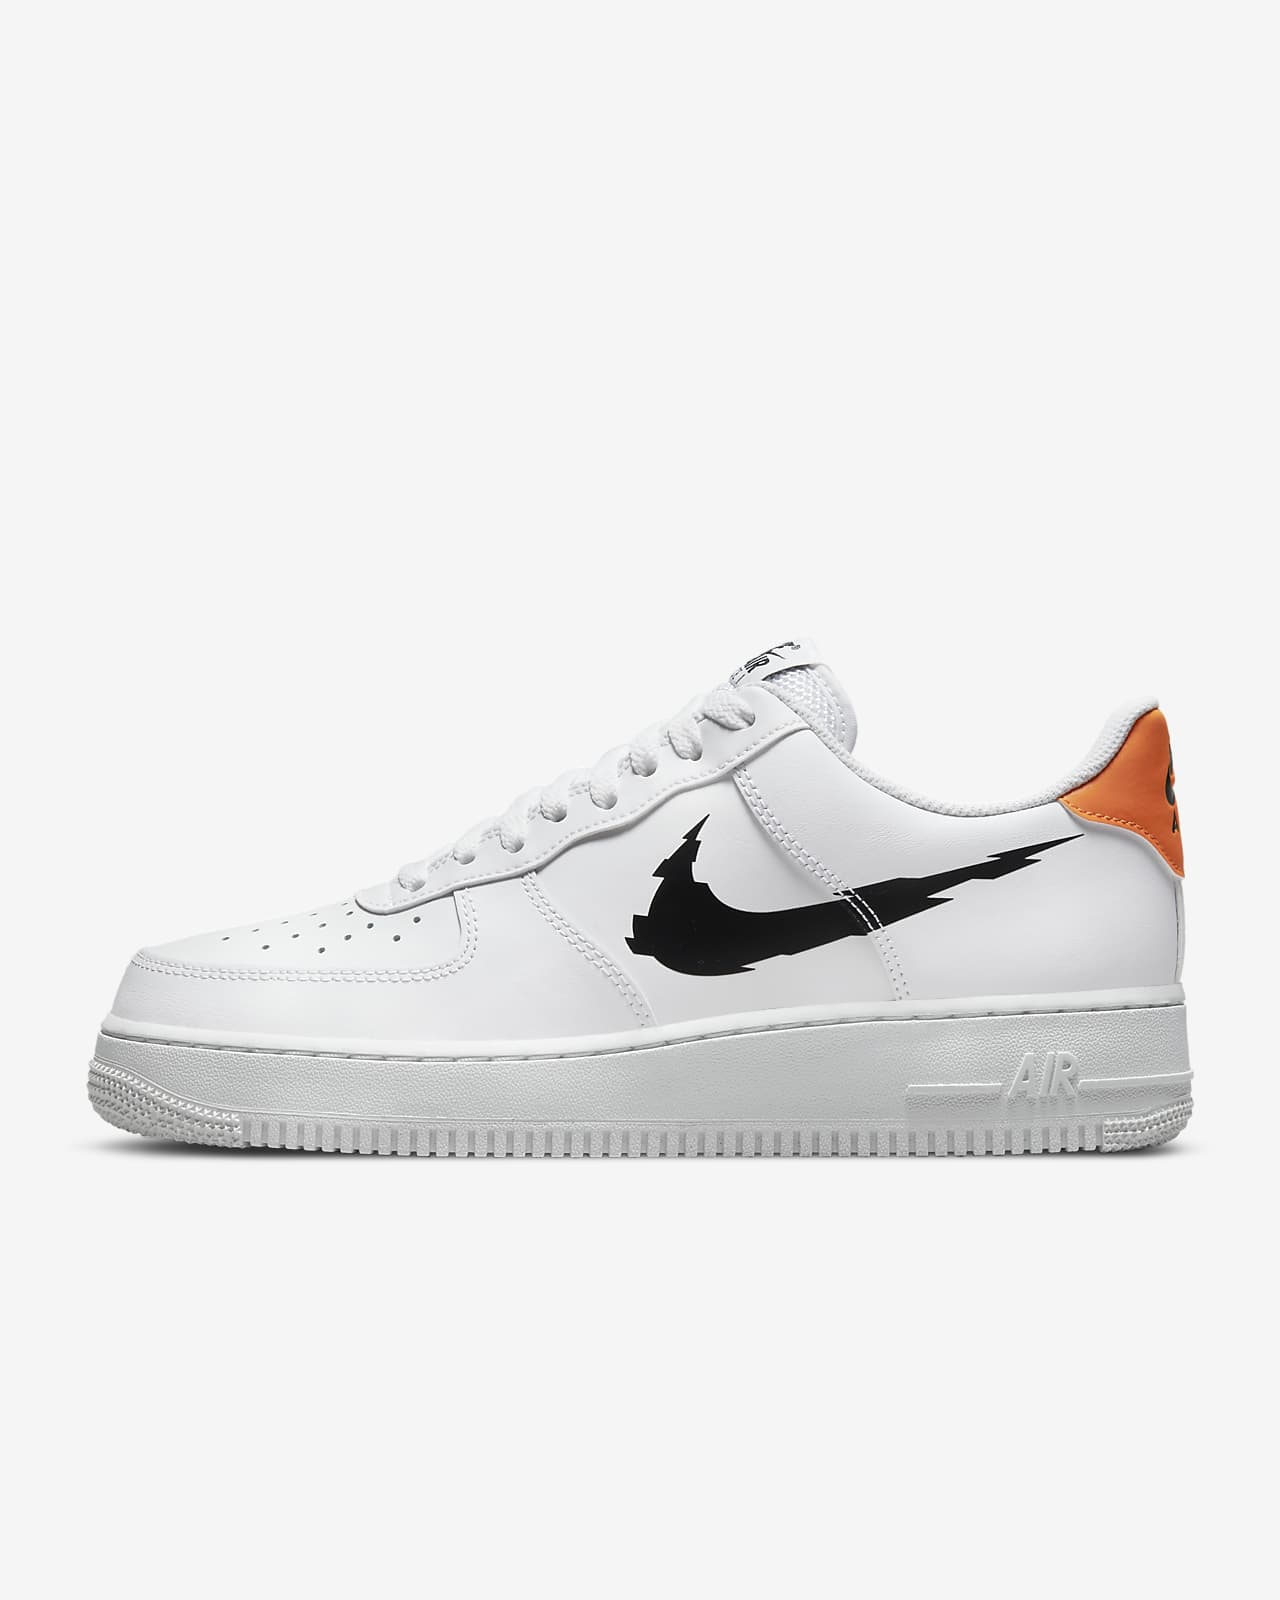 Nike Air Force 1 '07 Men's Shoes عبارة عيد الحب